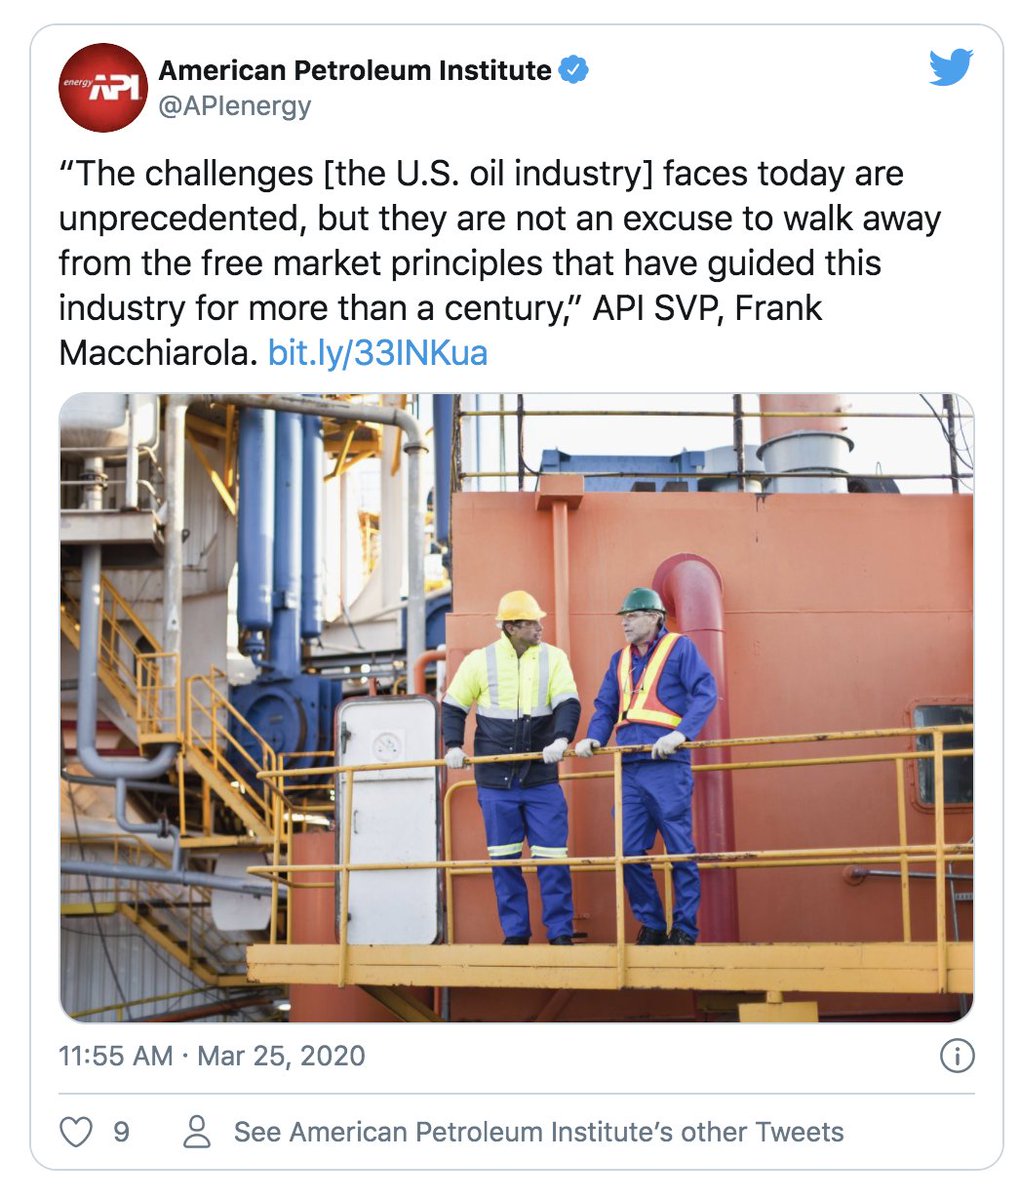 So, what do they want out of this meeting? The oil industry is fractured about the best response to this crisis. Independent E&Ps have backed direct bailouts and production cuts. Oil majors and their trade associations ( @APIenergy, TXOGA) have publicly opposed such actions.